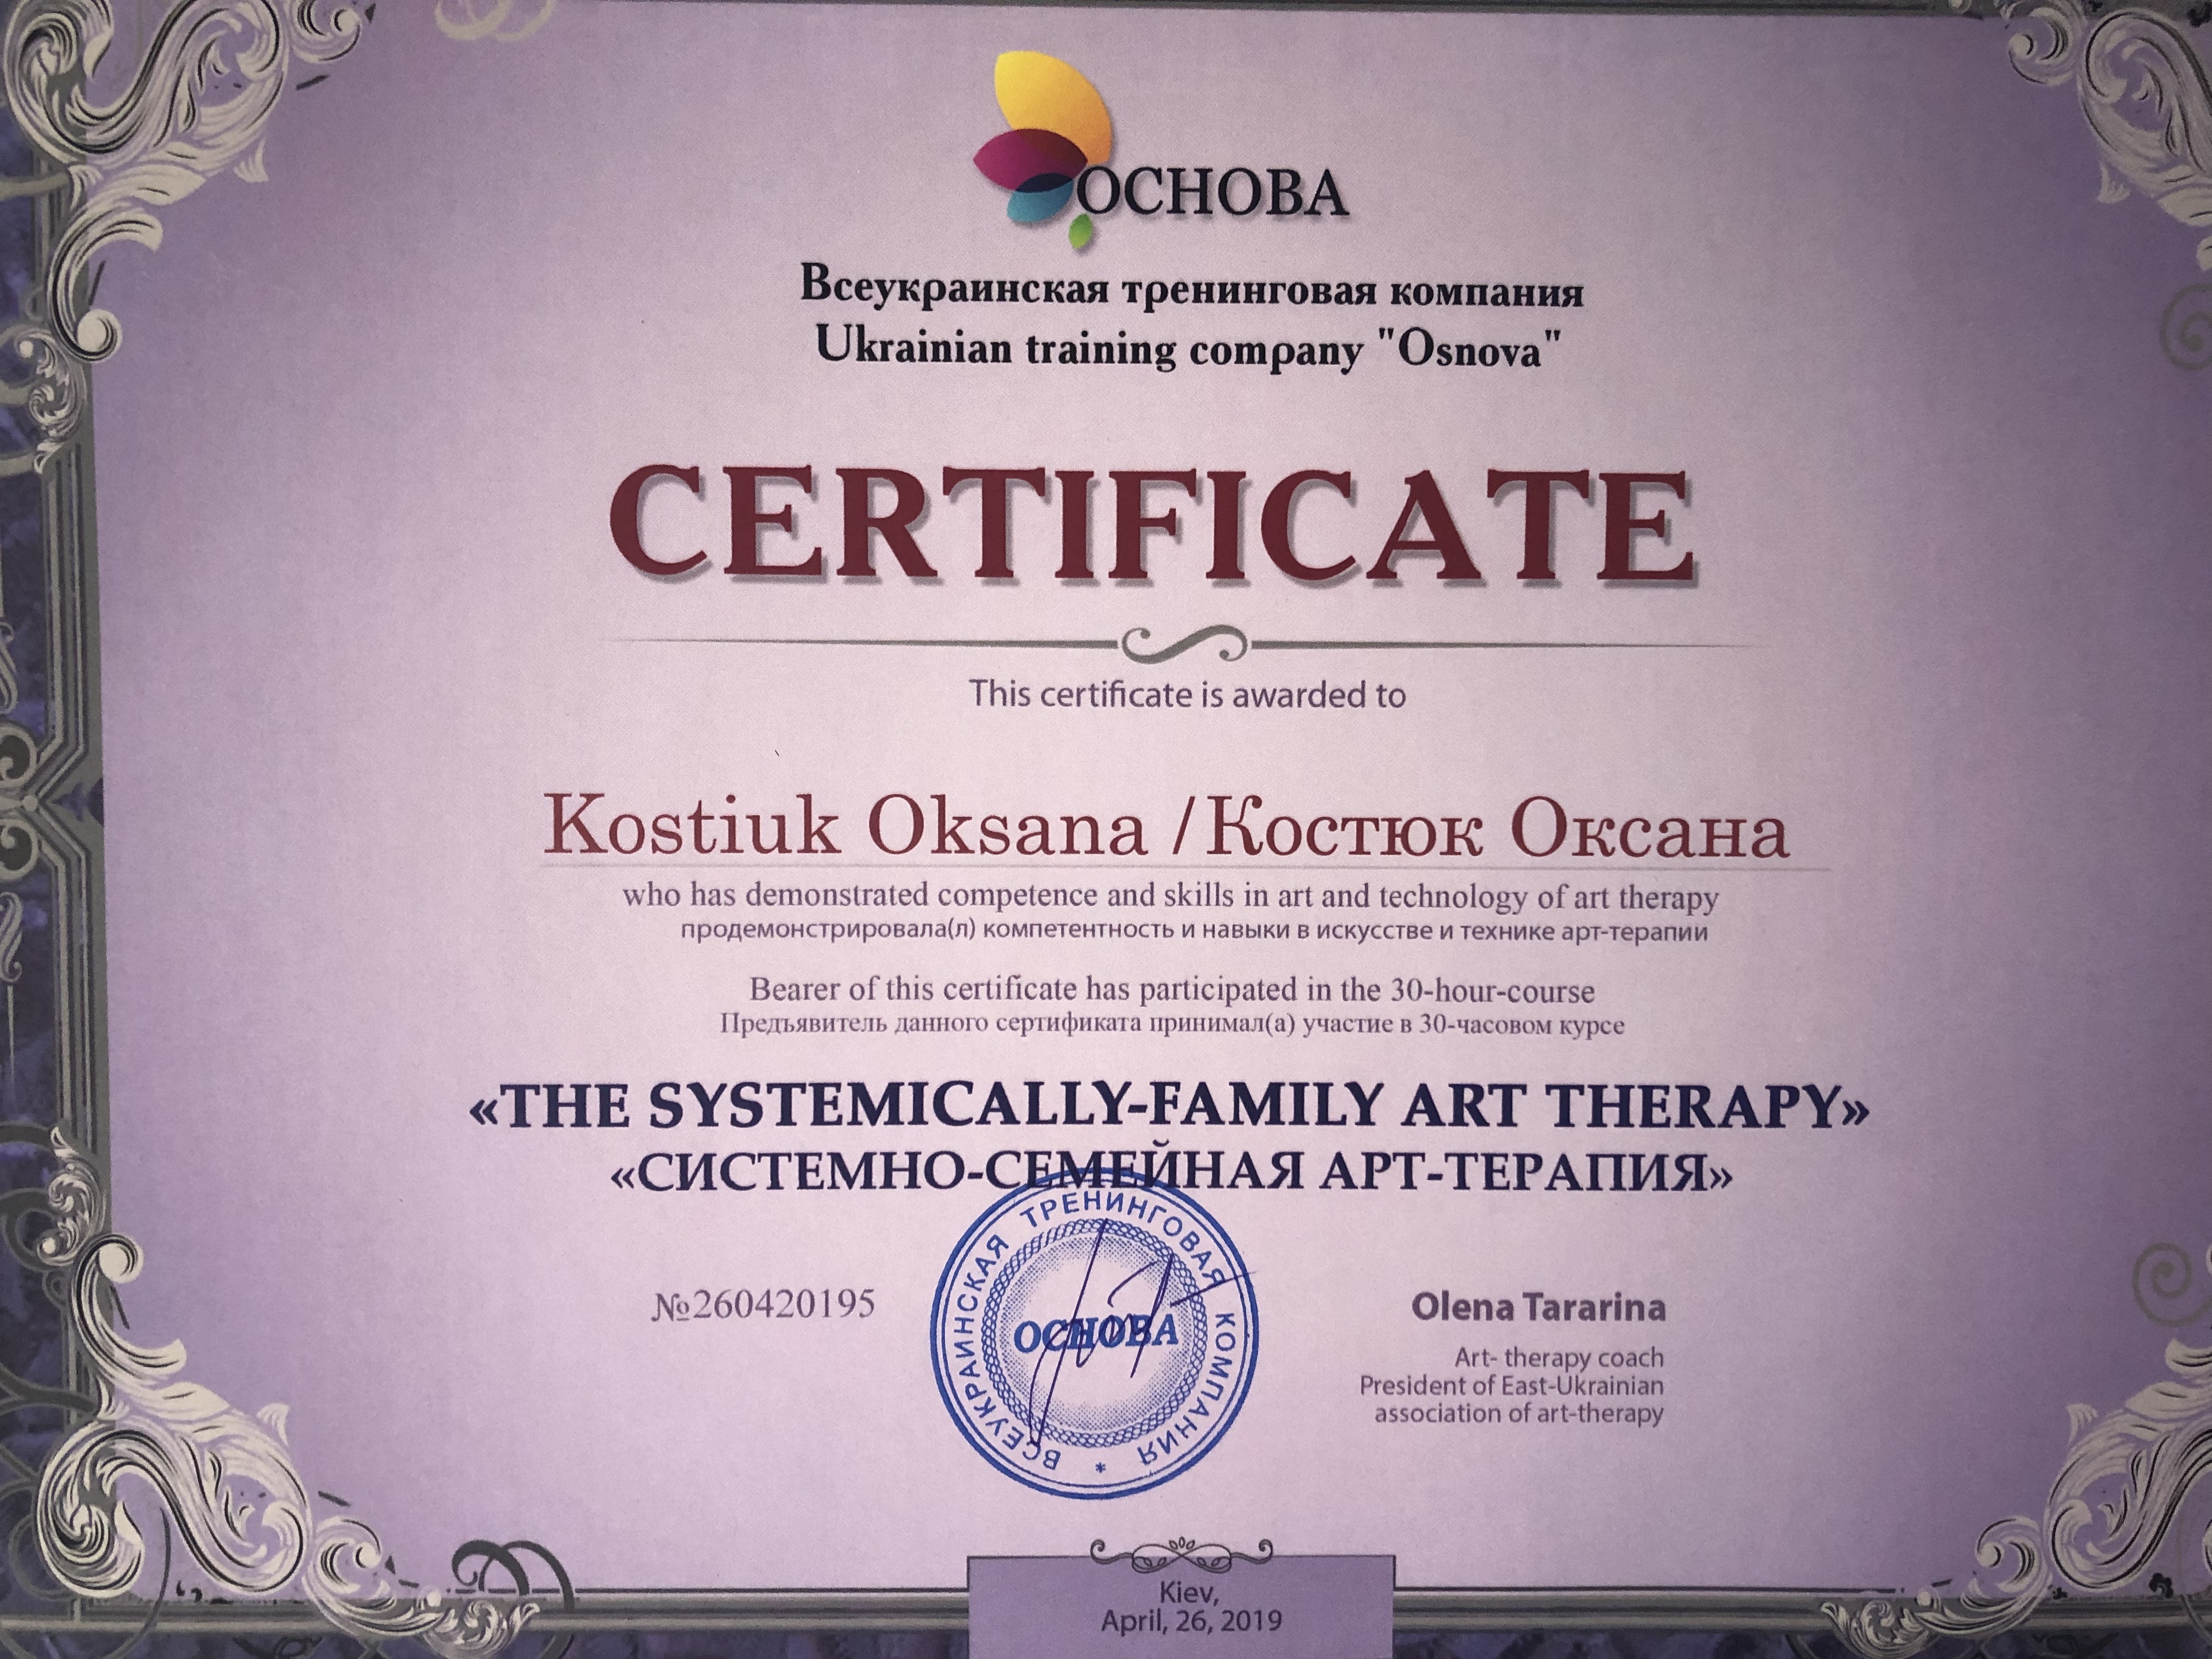 Systemic and family art therapy